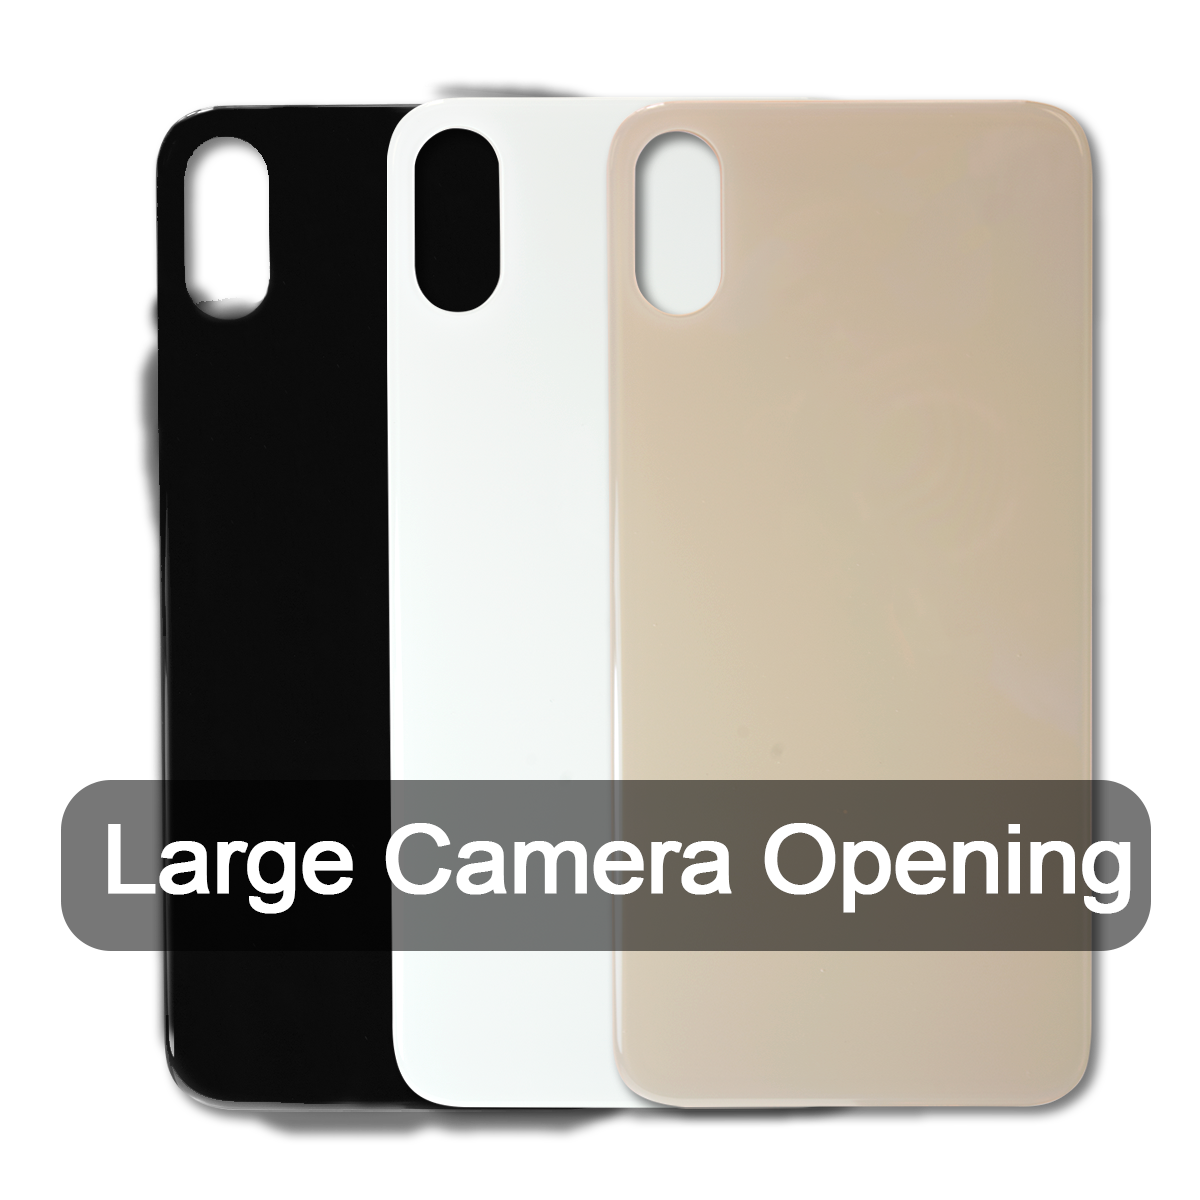 iPhone XS Max Rear Glass Cover Replacement with Large Camera Opening